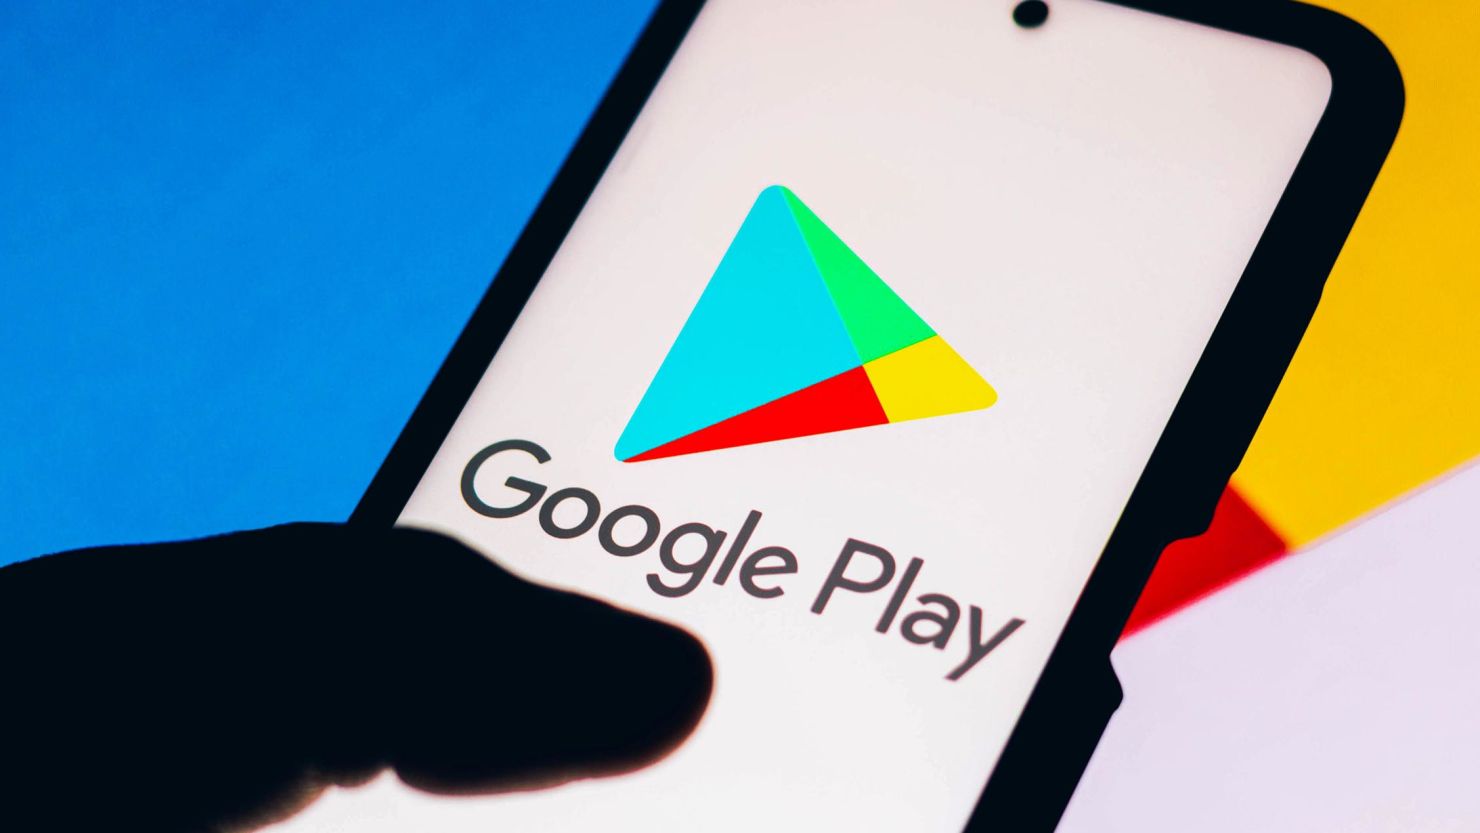 Google Play Store introduces new payment option "Ask someone else to pay"